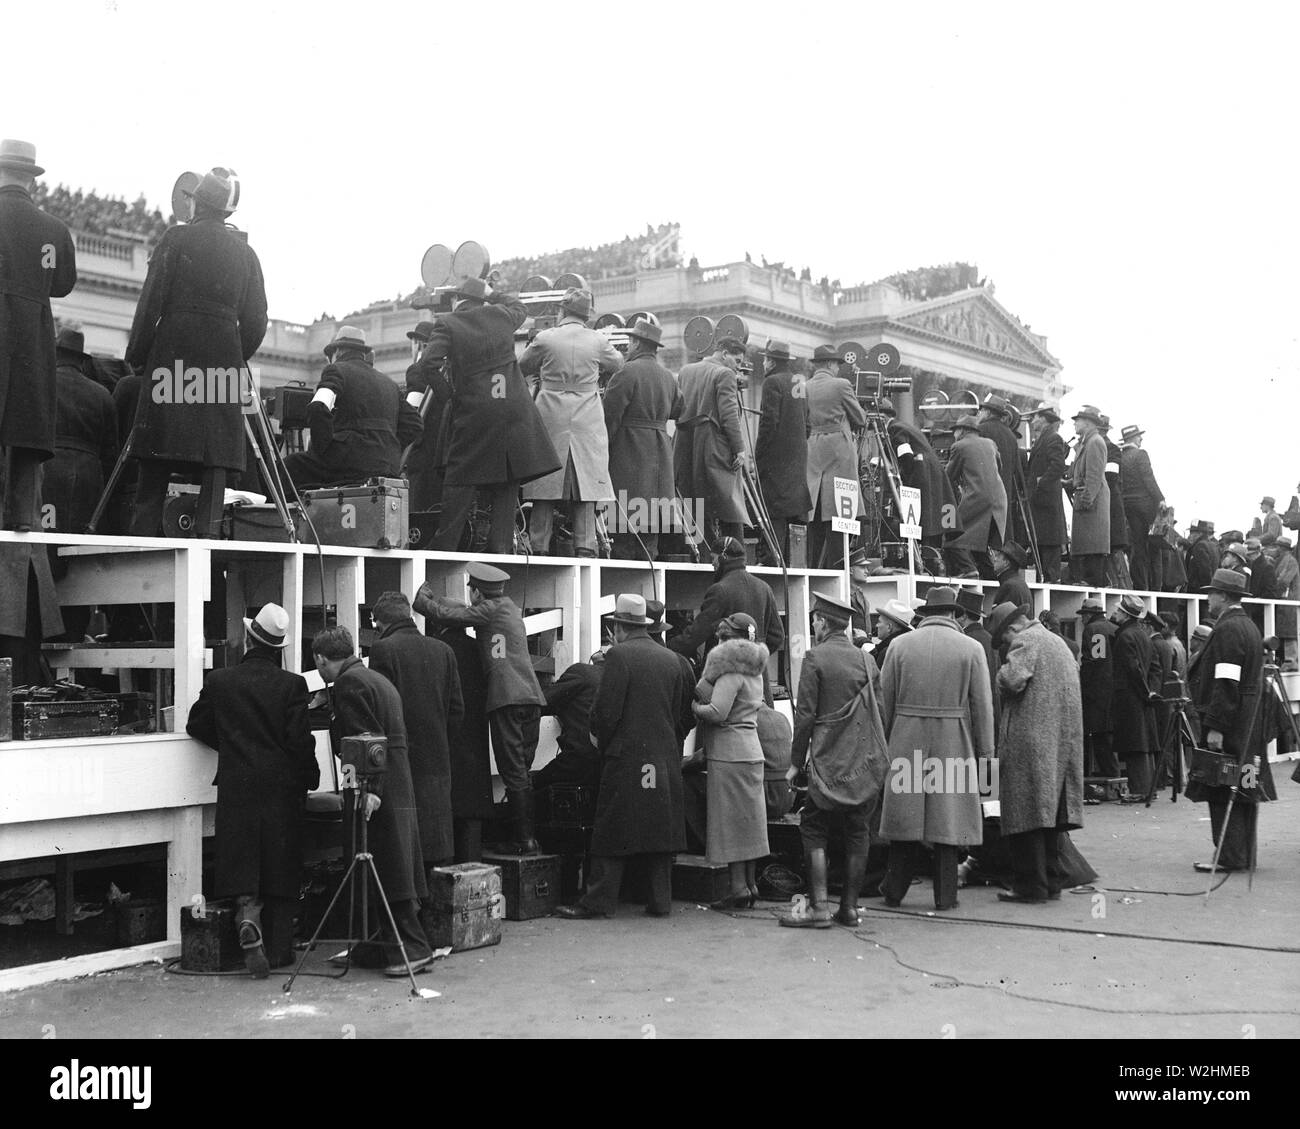 Franklin Roosevelt First Inaguration:  Crowd outside U.S. Capitol, Washington, D.C.  March 4, 1933 Stock Photo